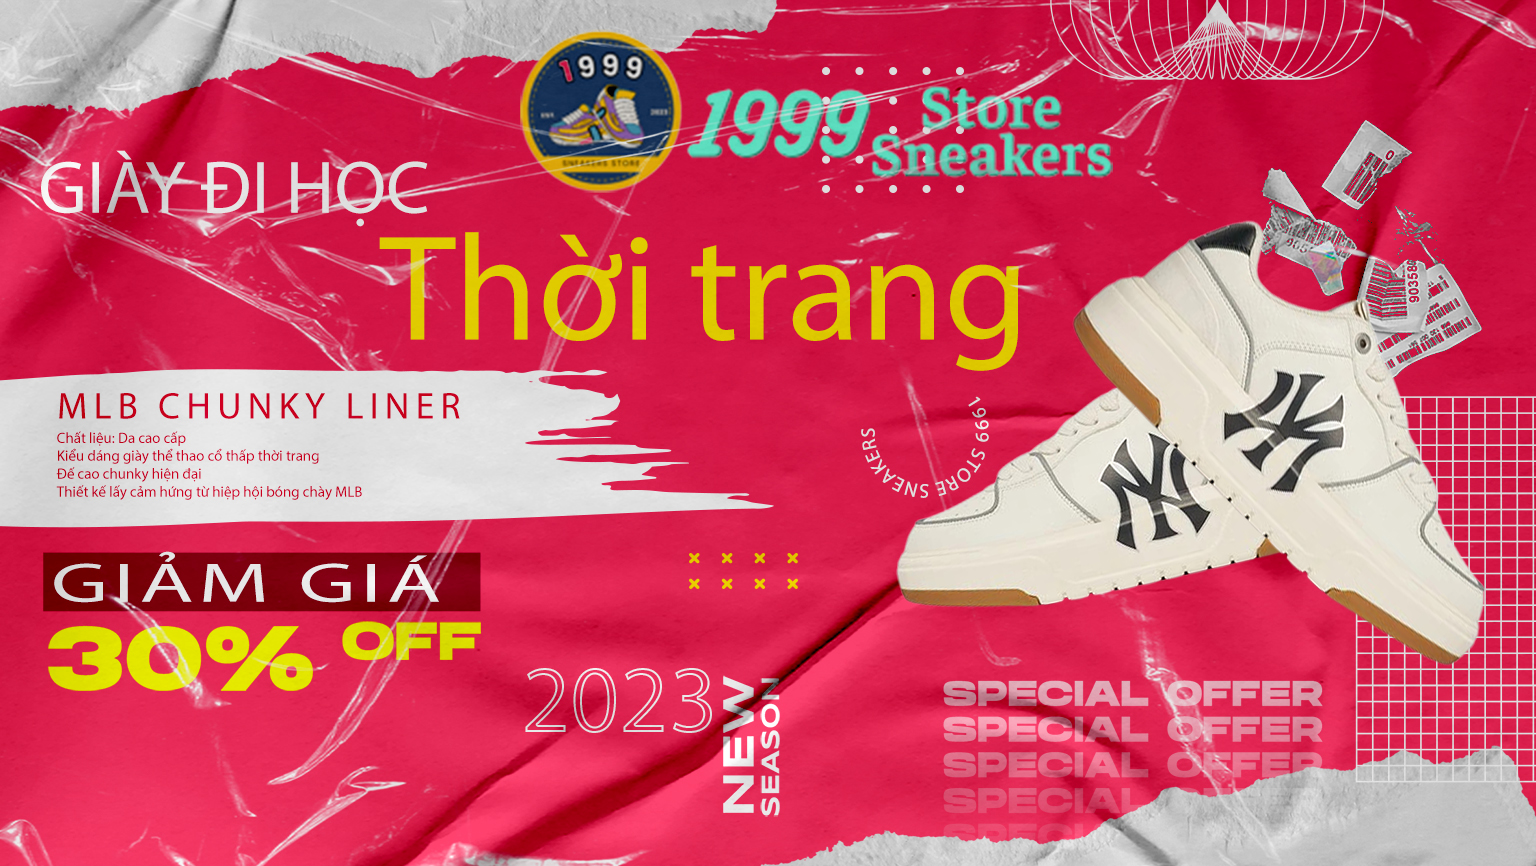 1999 store banner